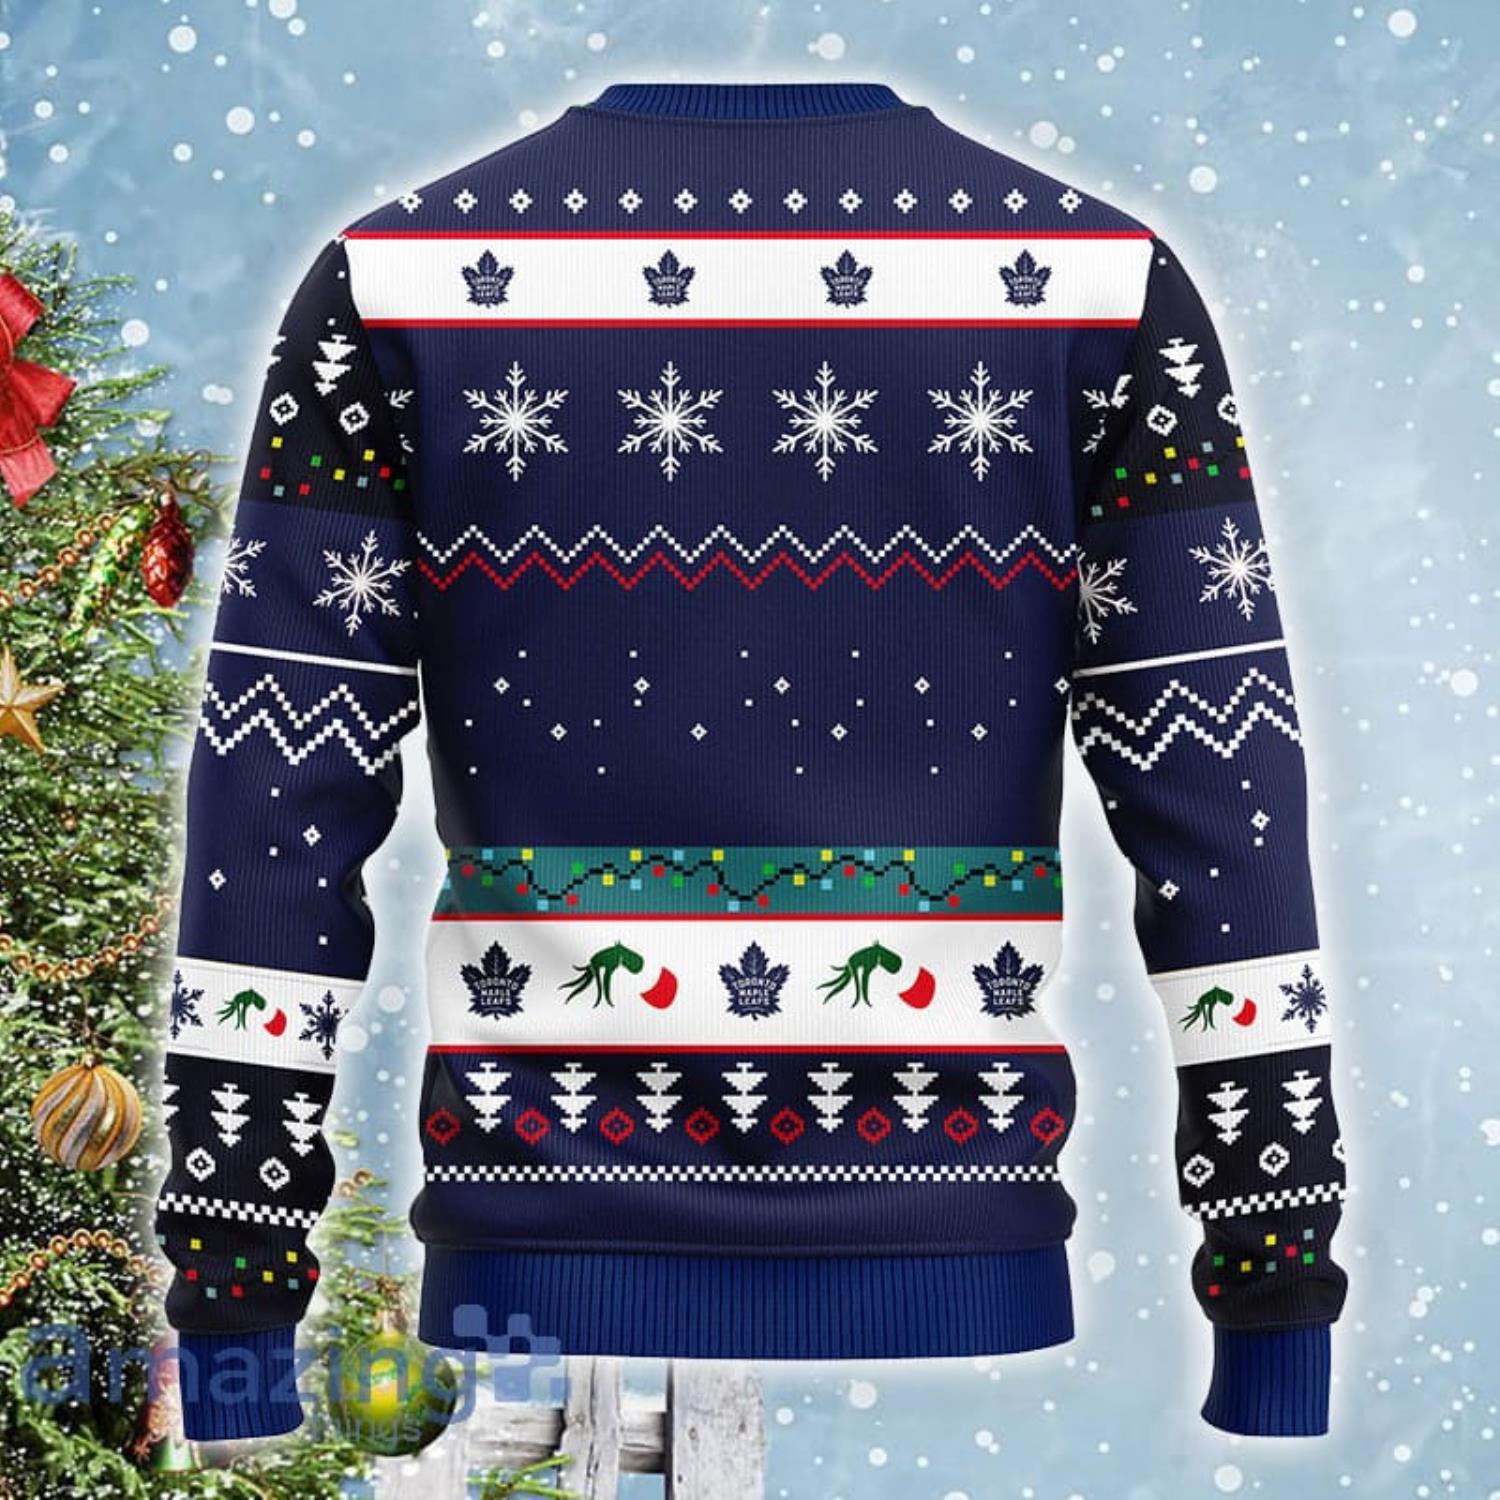 NHL Toronto Maple Leafs The Grinch Ugly Christmas Sweater